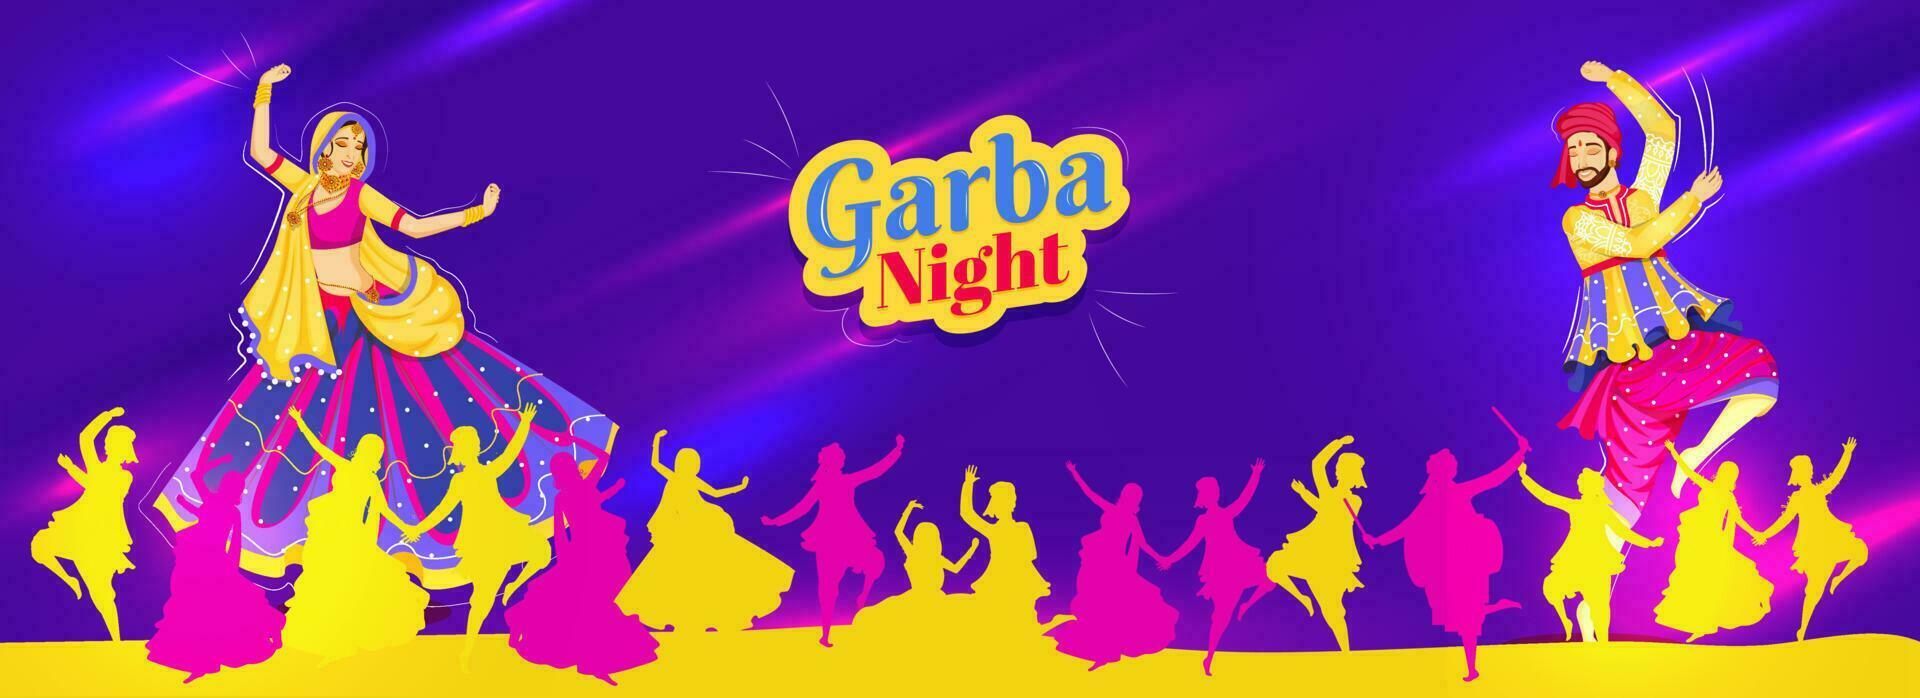 Advertisng Garba Night party header or banner design with illustration of couple dancing on glossy purple lighting background. vector